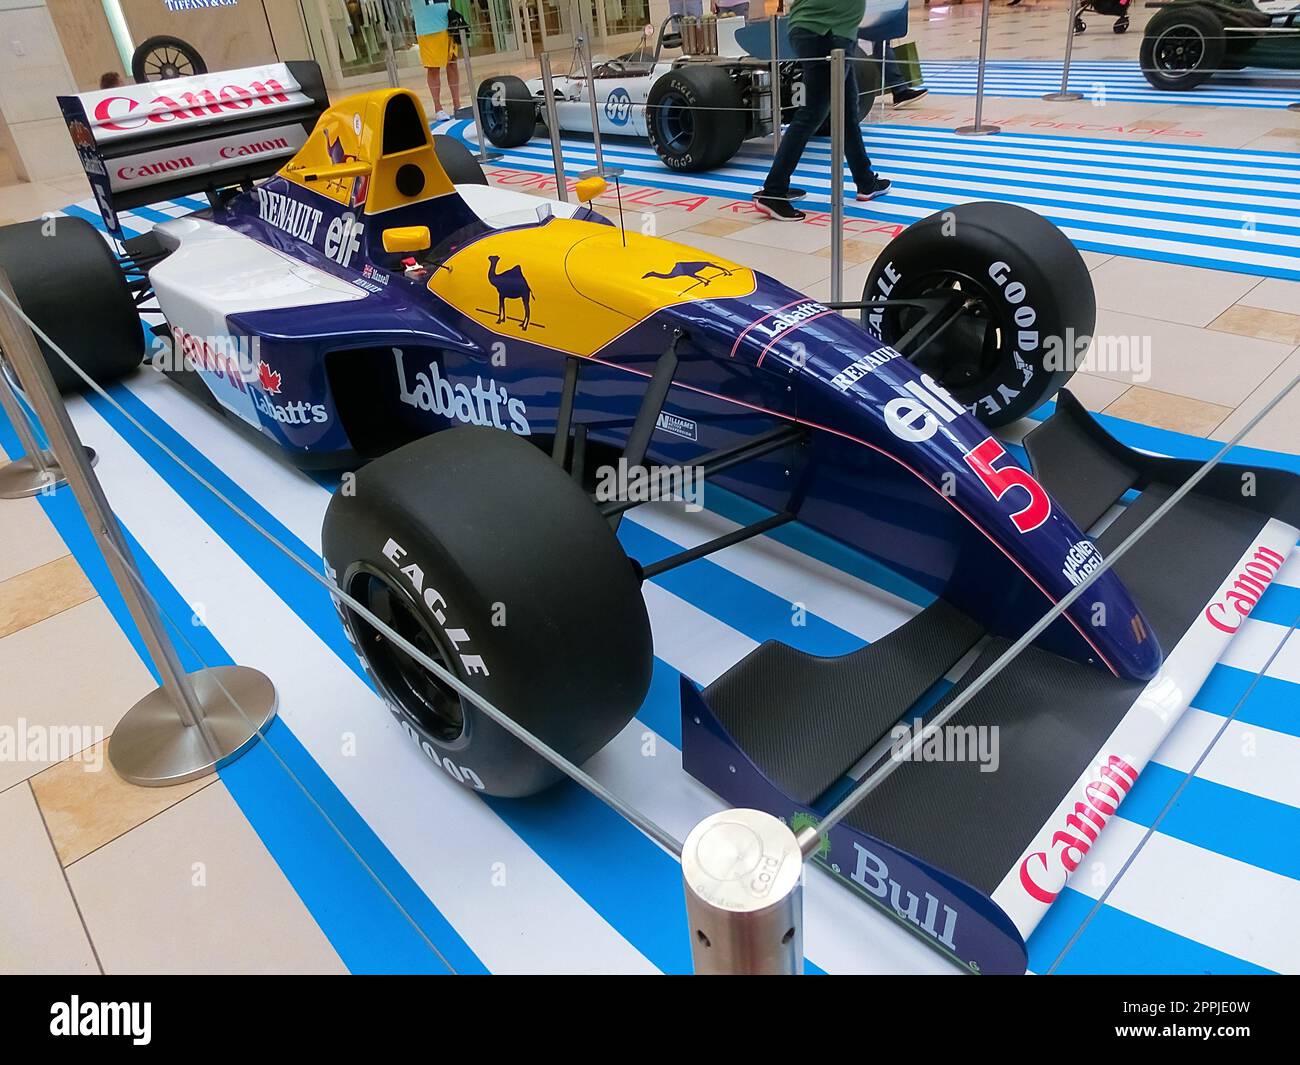 Formula 1 race cars in the Aventura Mall in Florida Stock Photo - Alamy